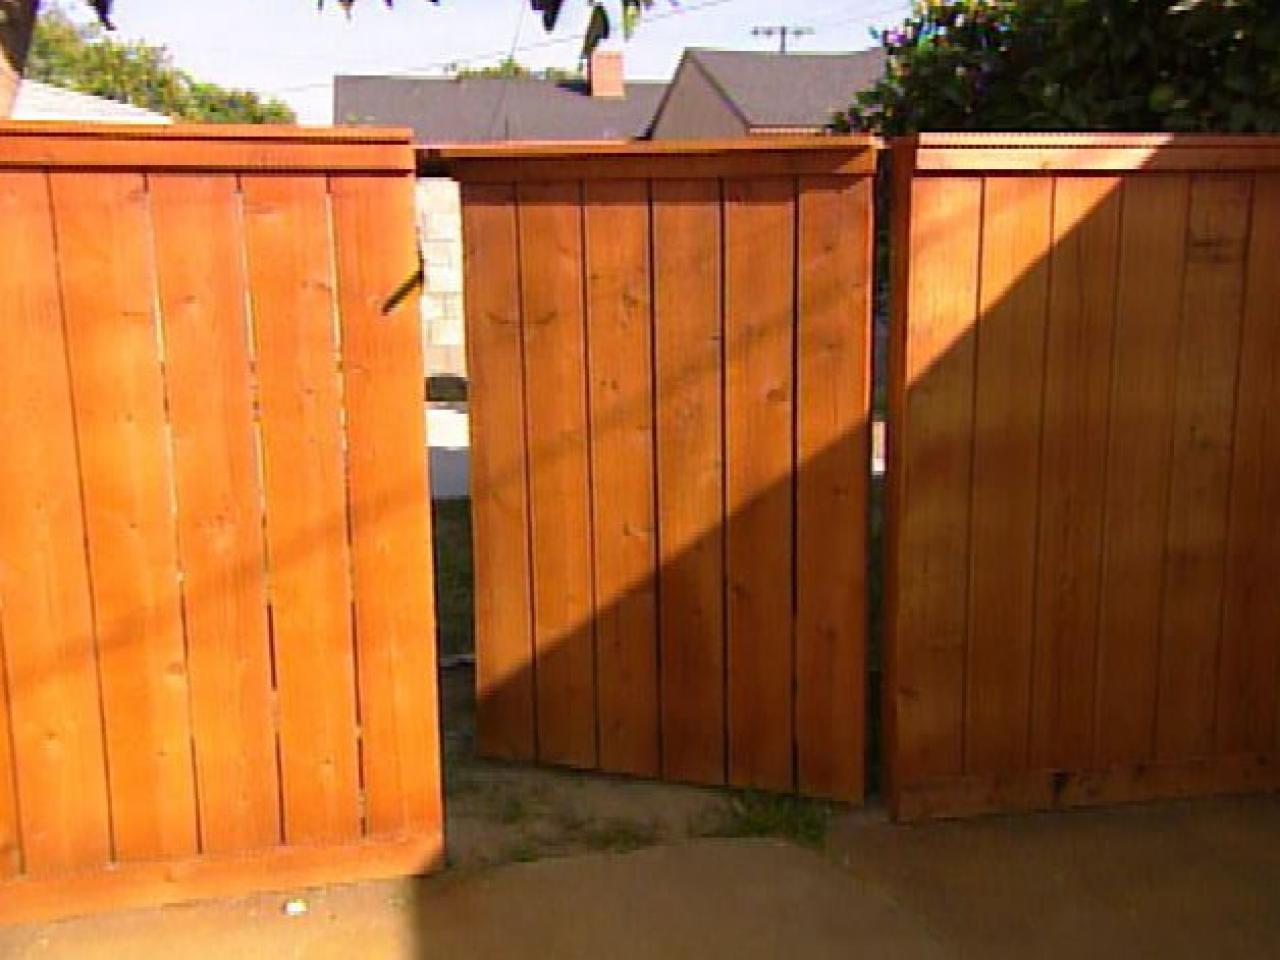 How to: Building a Wooden Gate | Landscaping Ideas and Hardscape ...